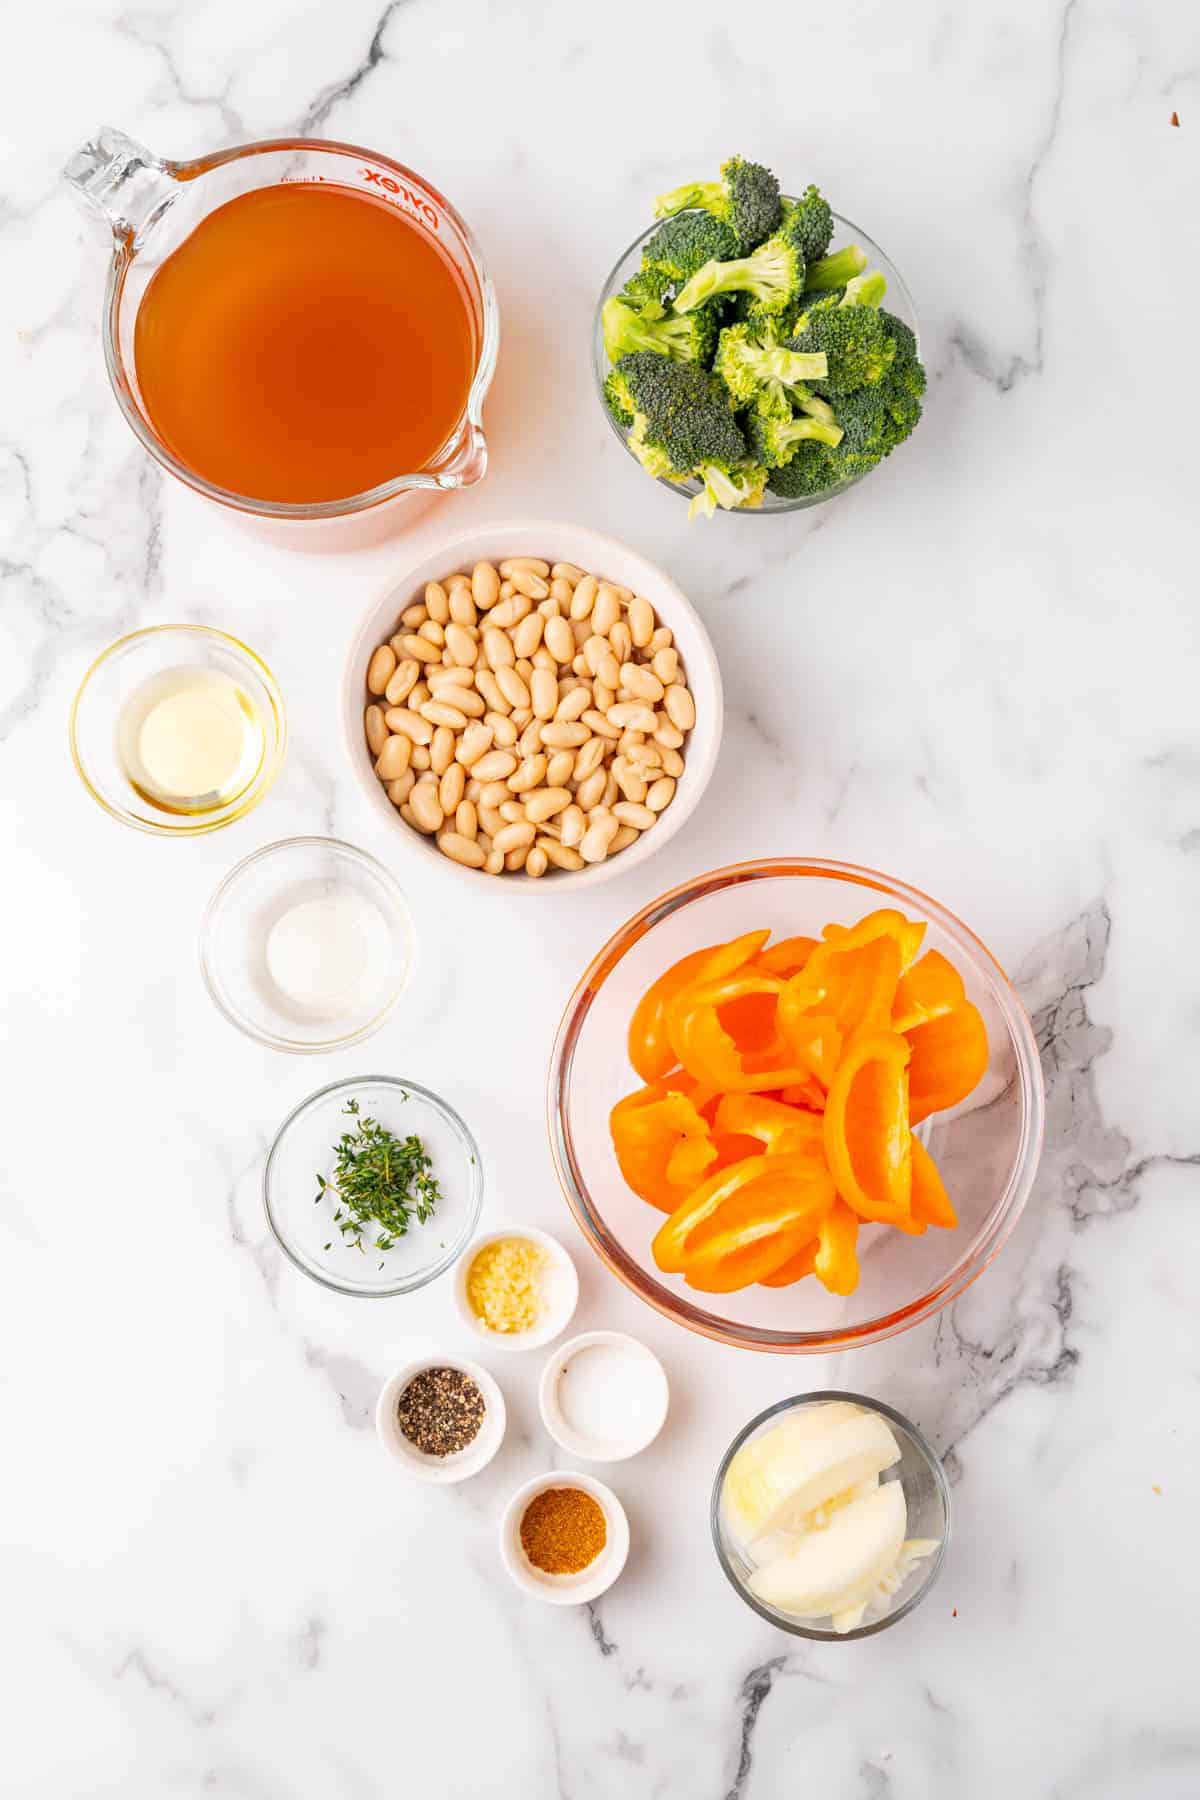 Ingredients for recipe separated into individual bowls and ramekins, as seen from above on a white marble countertop